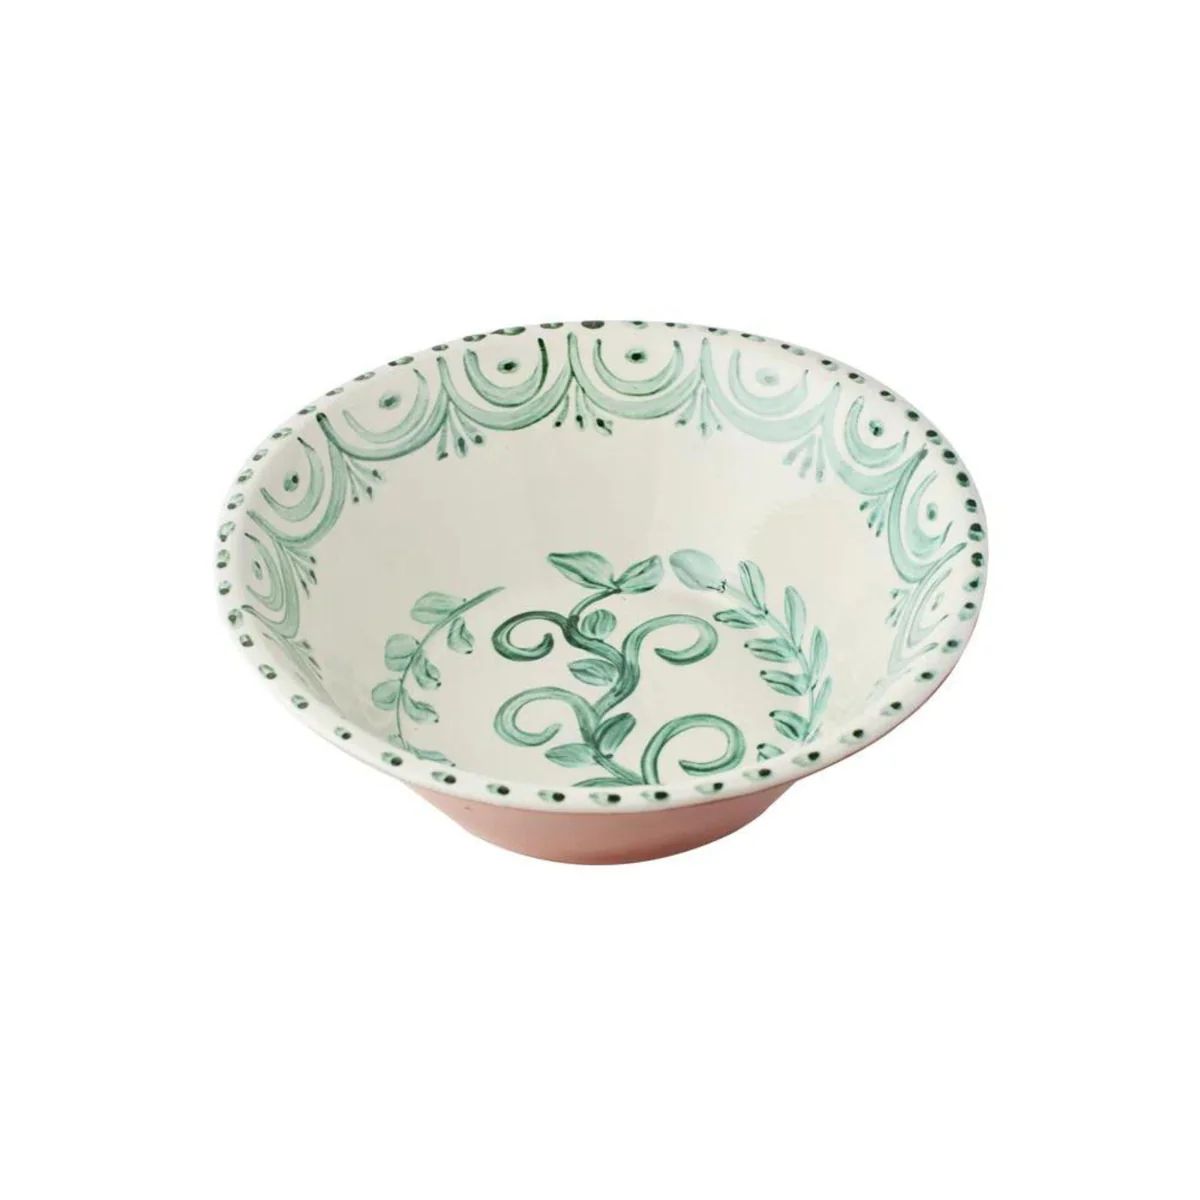 Hand Painted Green & White Serving Bowl | The Well Appointed House, LLC